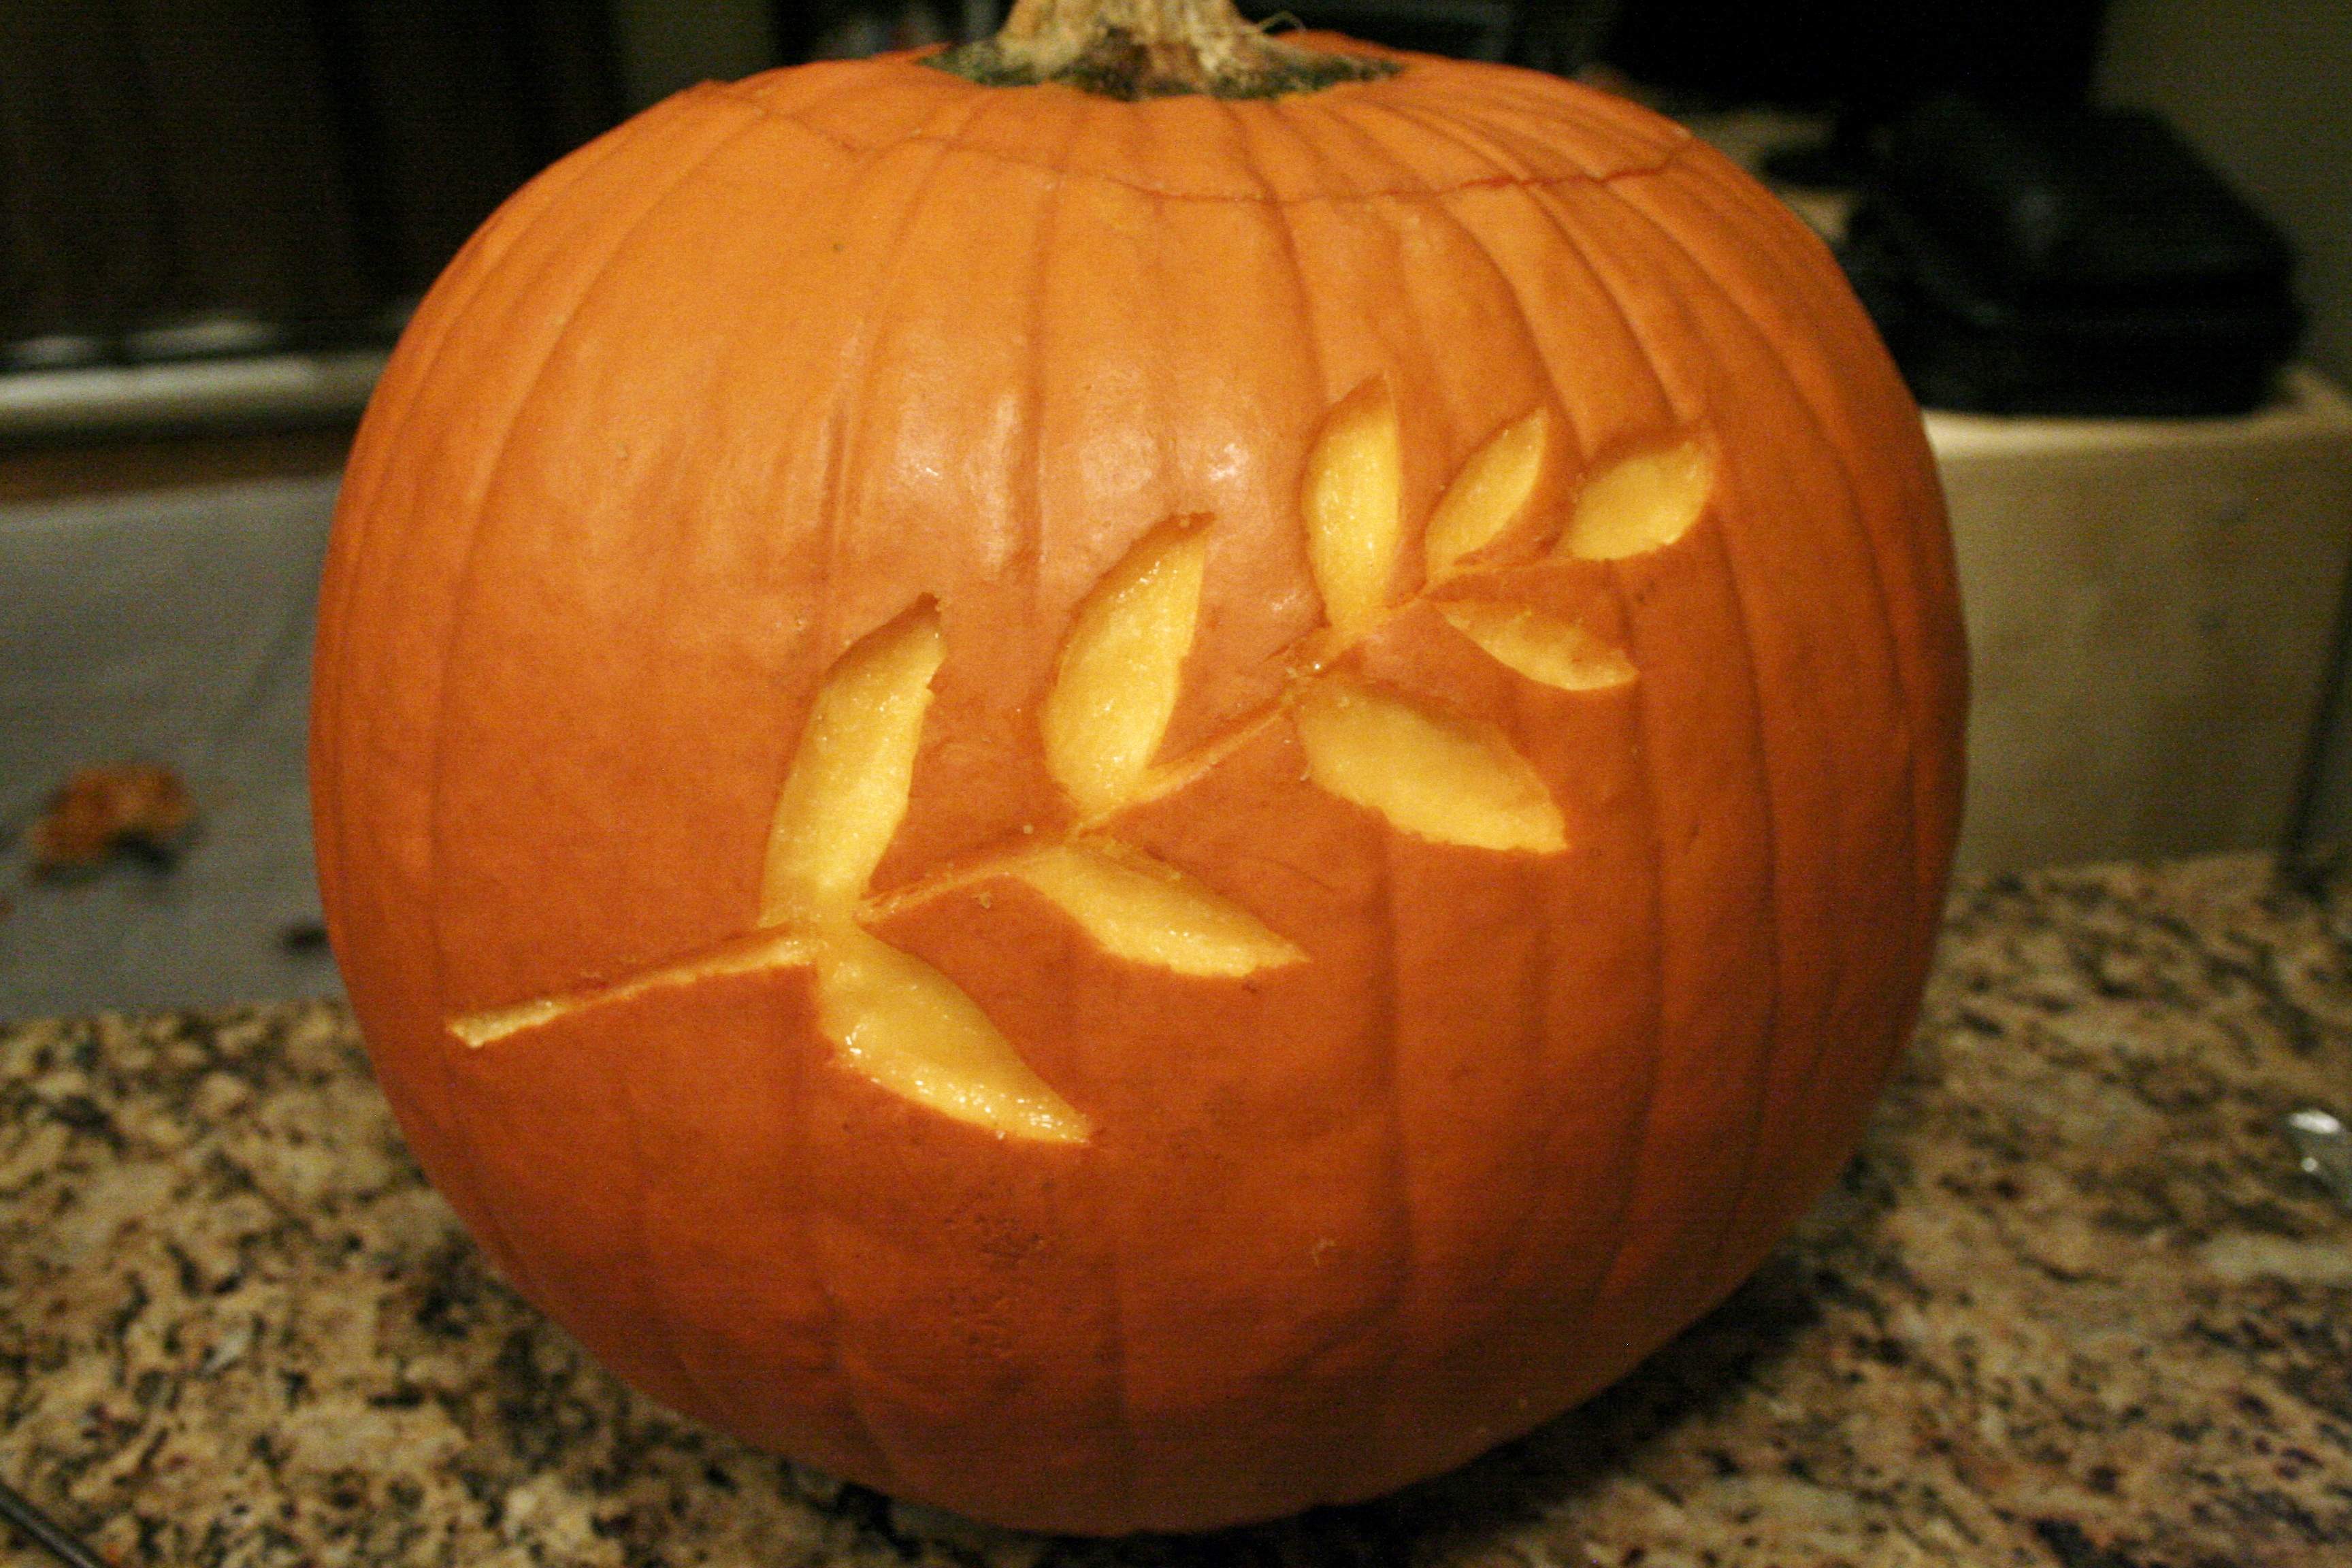 Carved pumpkin (roast the seeds with curry for a healthy snack!)